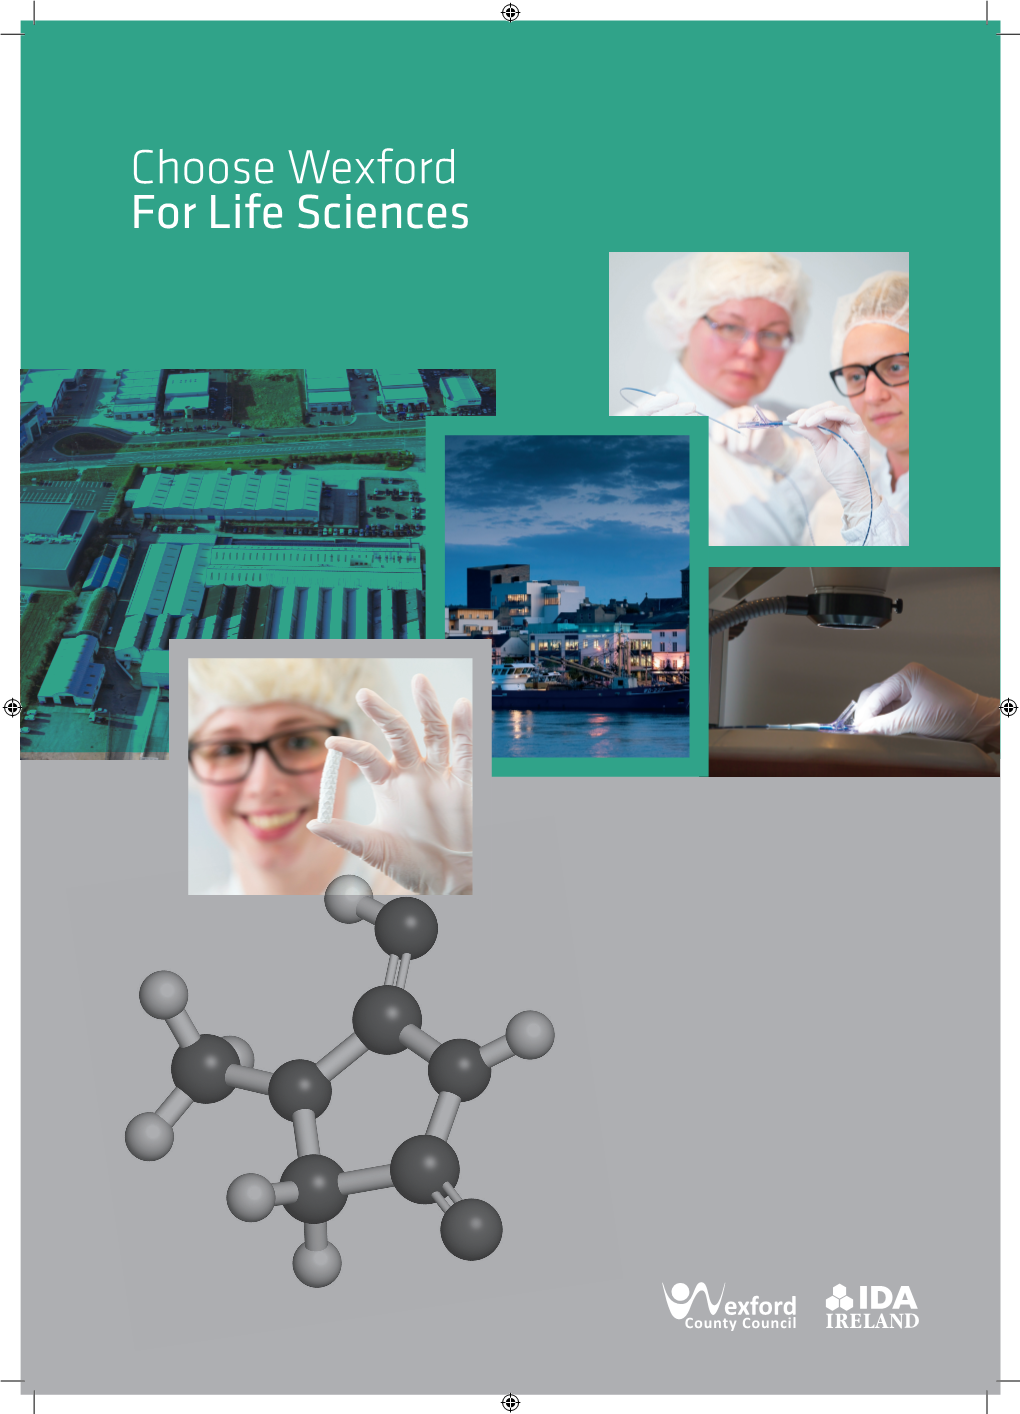 Choose Wexford for Life Sciences